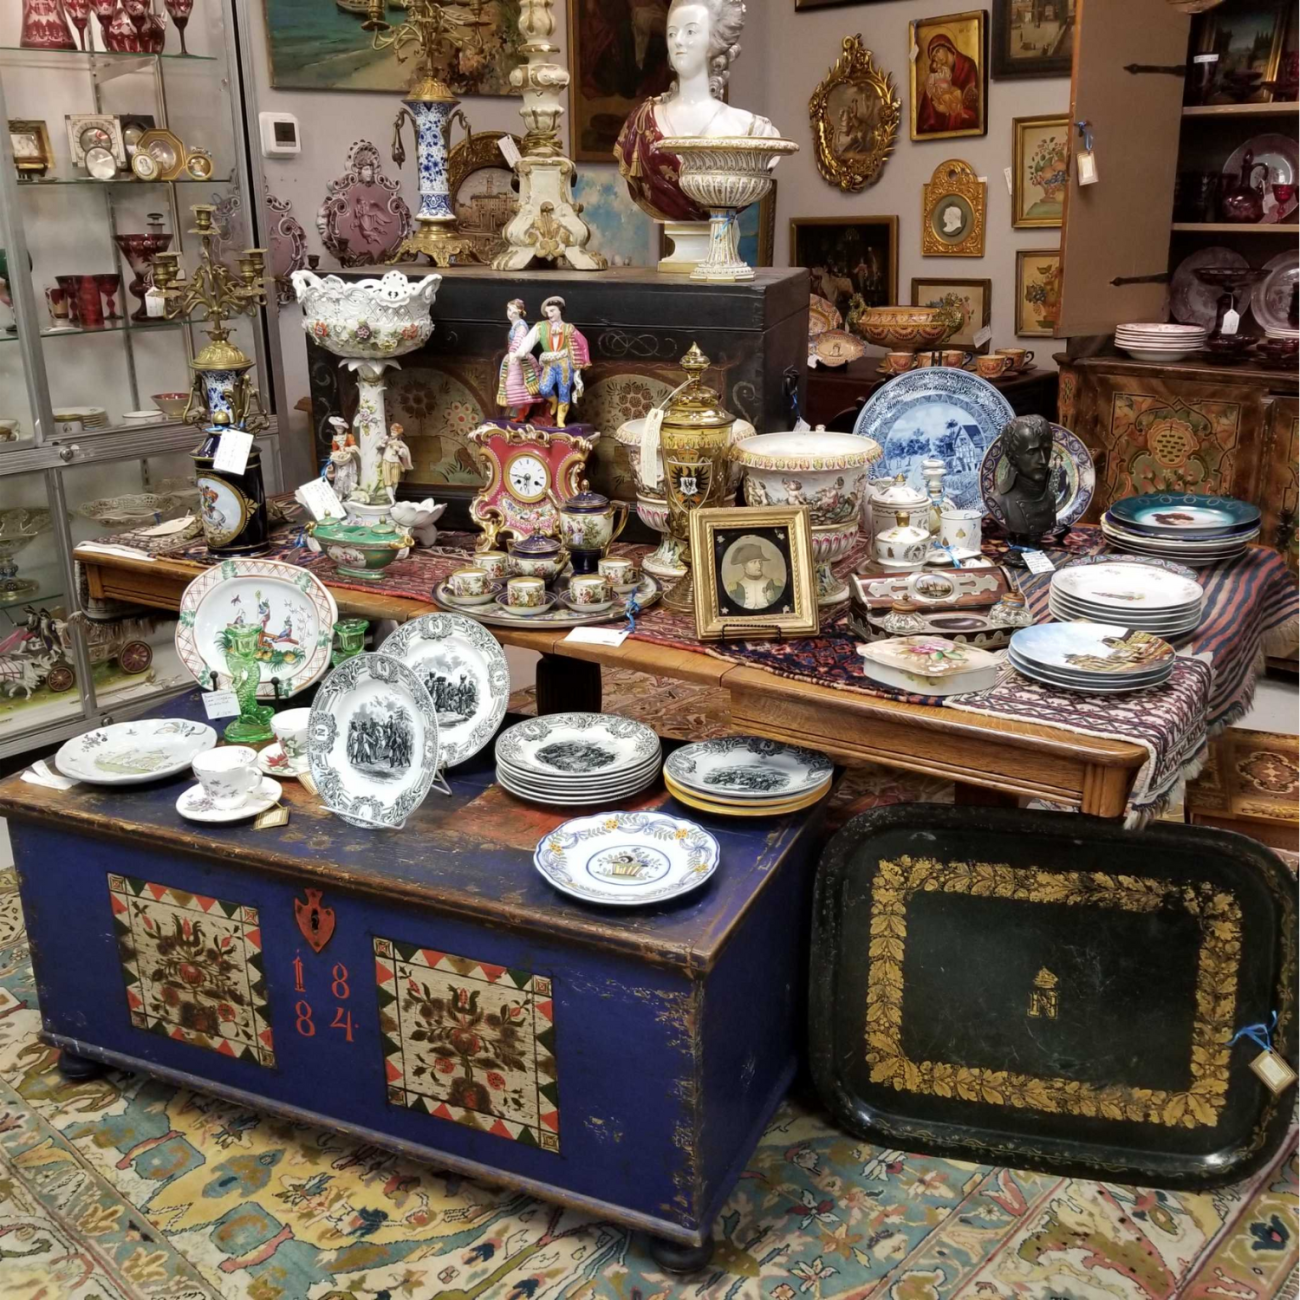 Antique china, and other furniture.